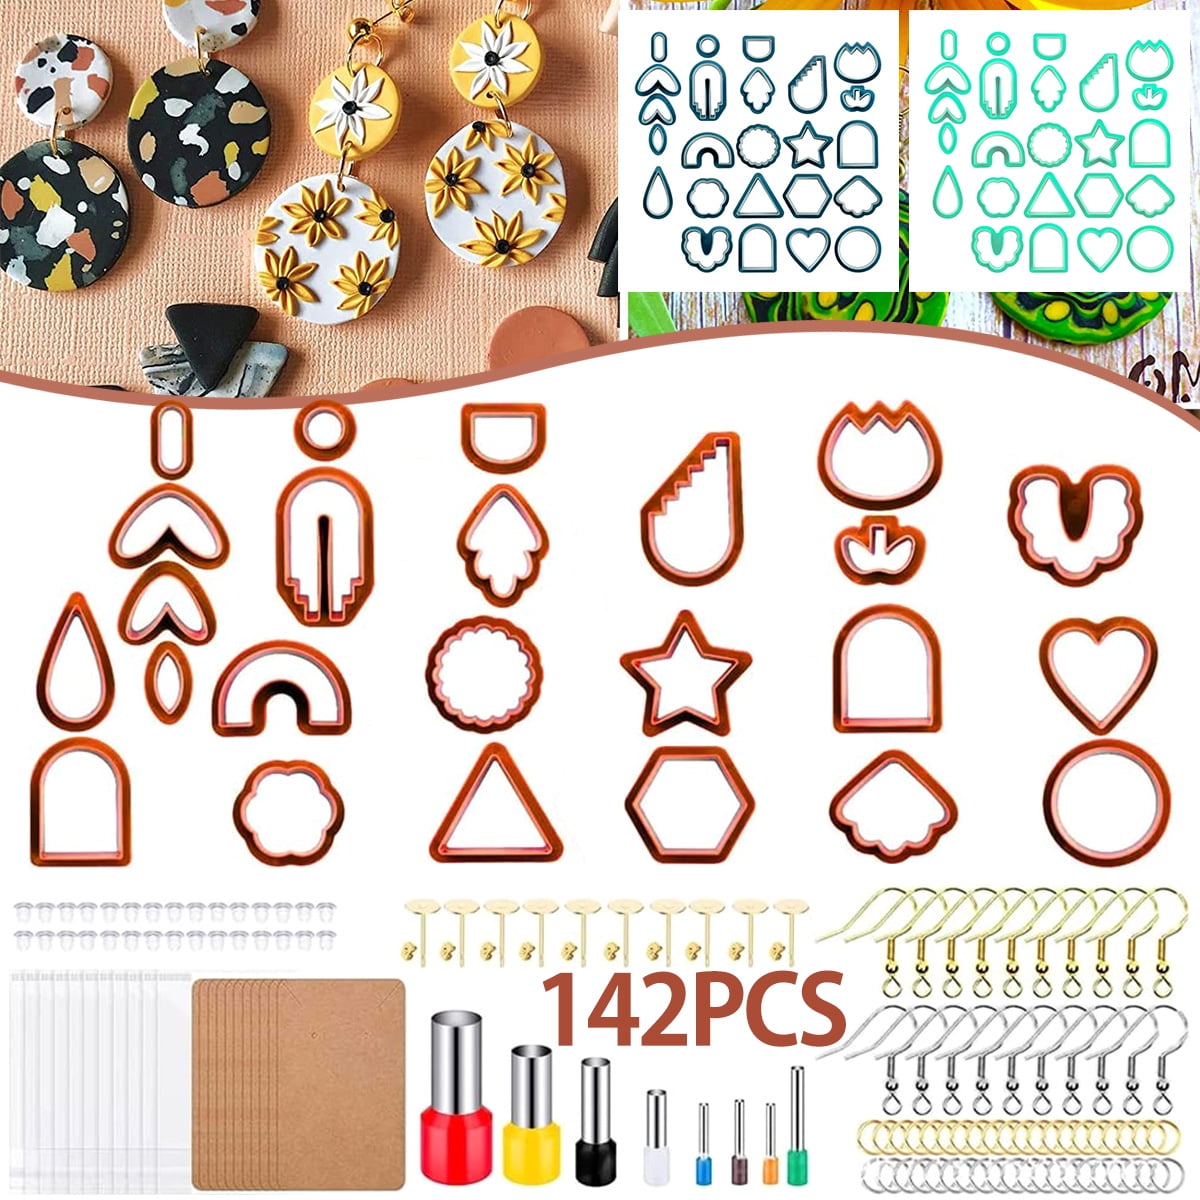 Polymer Clay Cutters Set, Include 24 Shapes Clay Earring Cutters & 160  Earring Accessories, Plastic Clay Cutters for Earring Jewelry Making, DIY  Earring Cutter Molds Set for Girls 